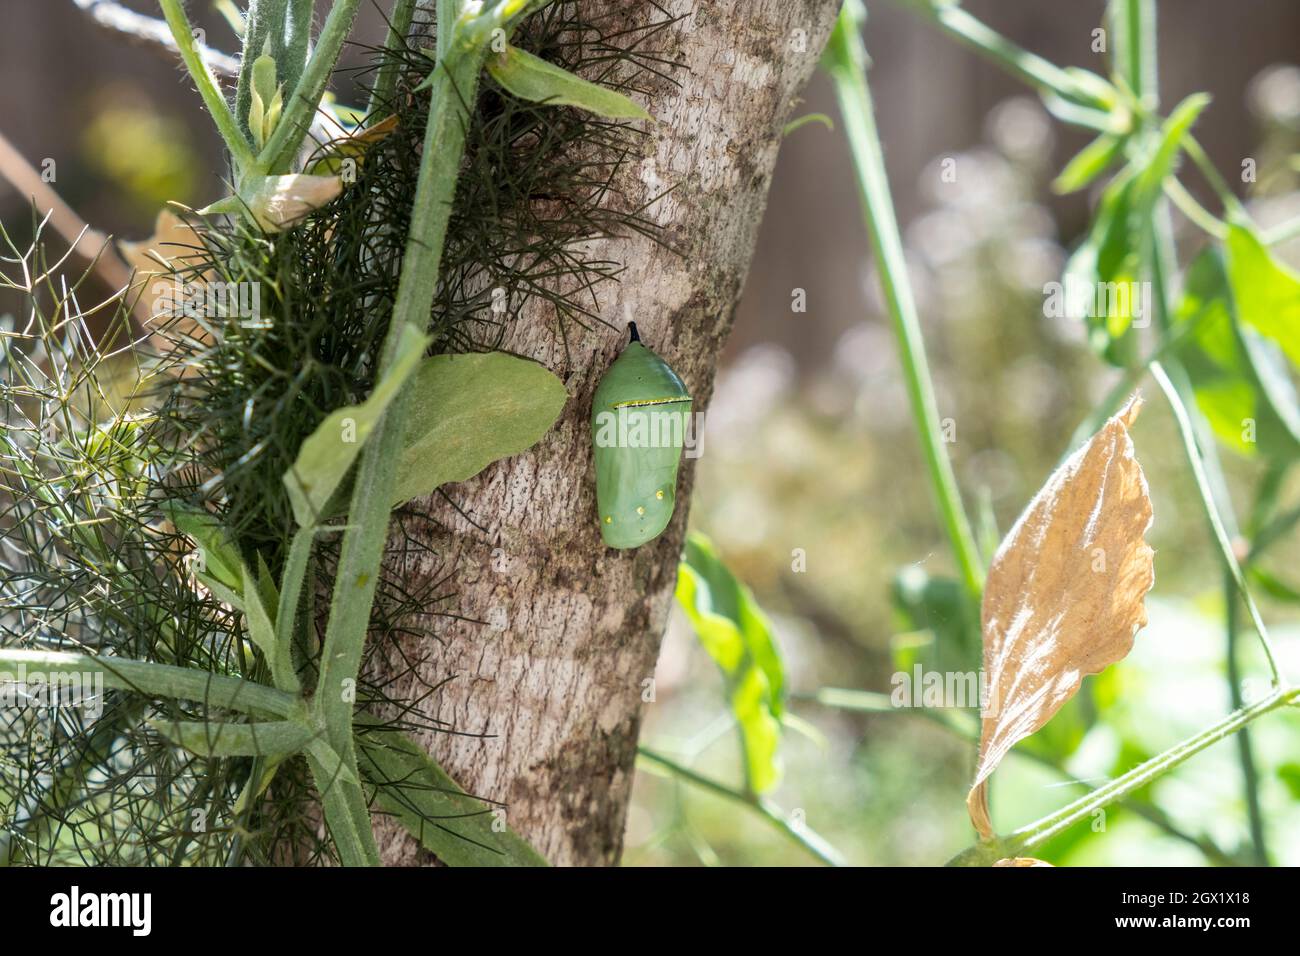 Western Monarch Butterfly, Danaus plexippus, early Chrysalis stage, close up attached to a tree trunk in a California home garden Stock Photo